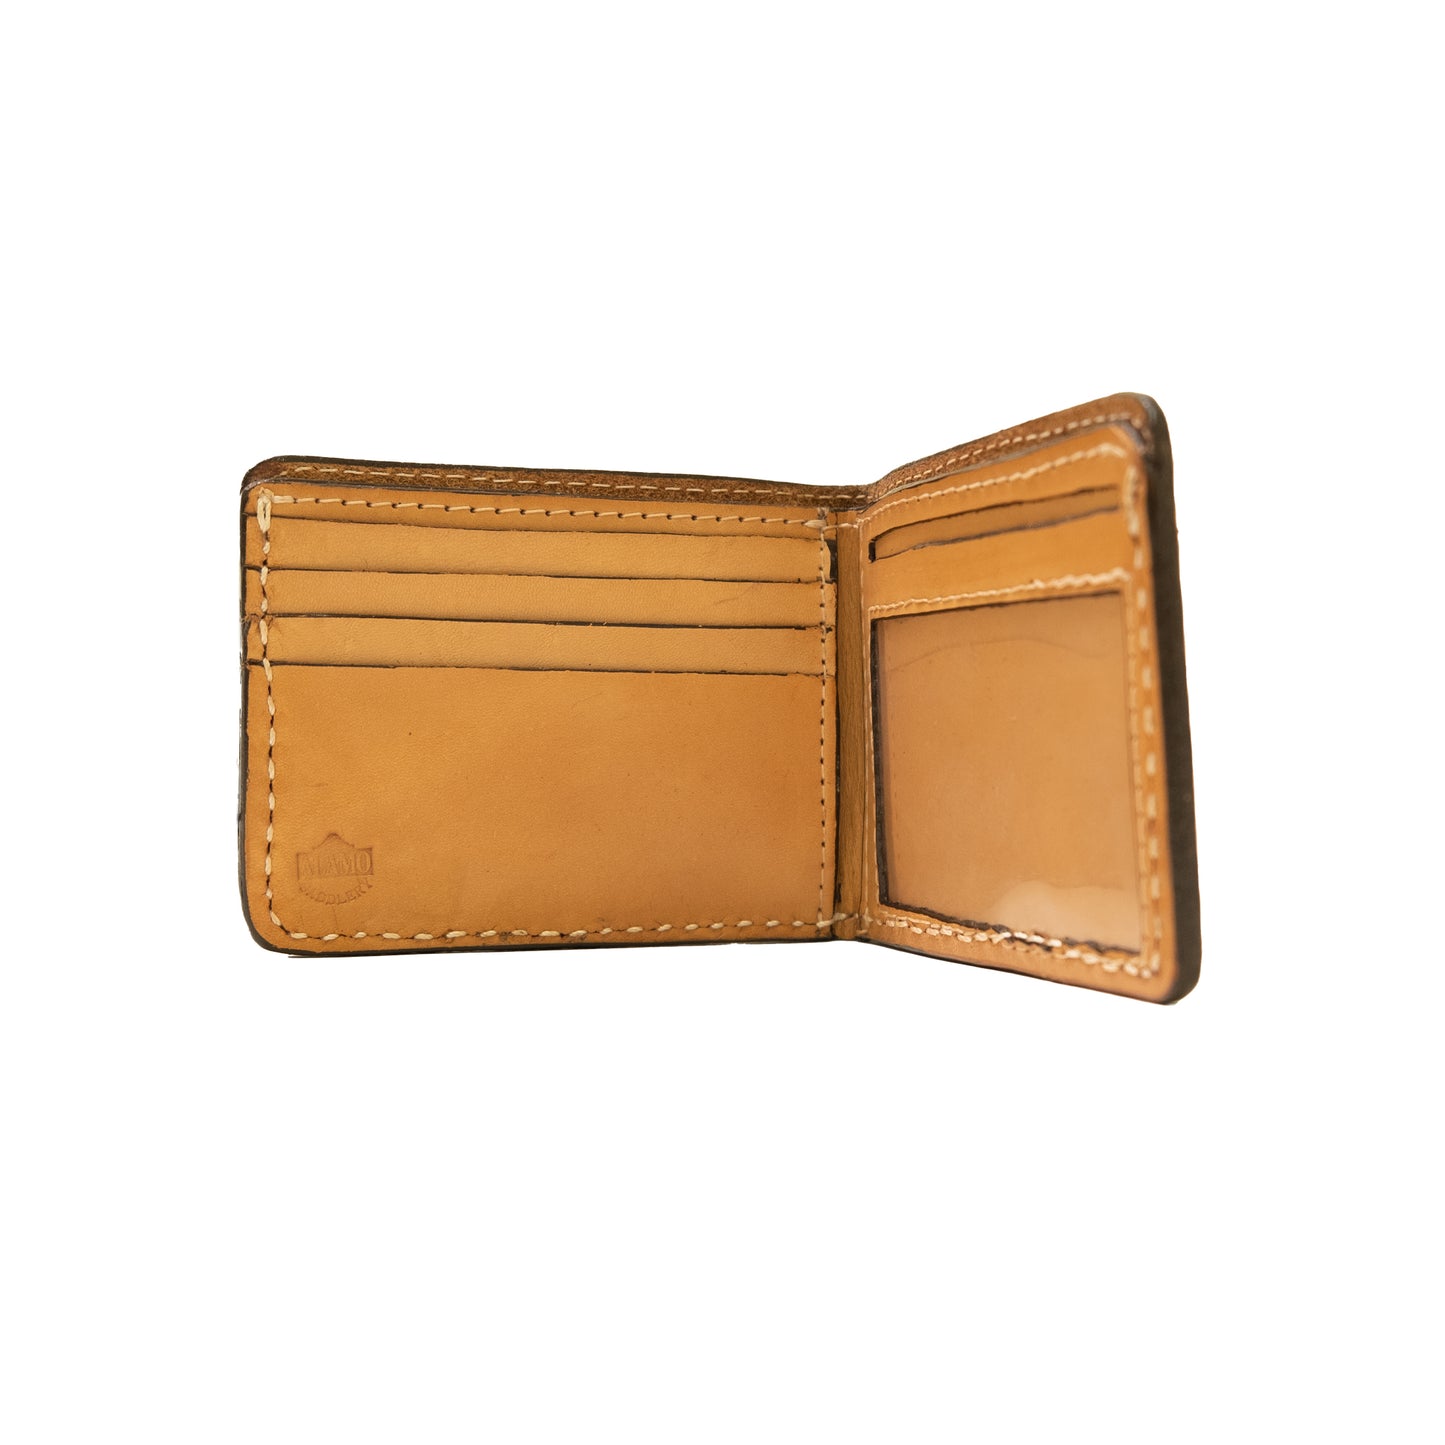 Bi-fold wallet golden leather mini poco oak tooling with background paint